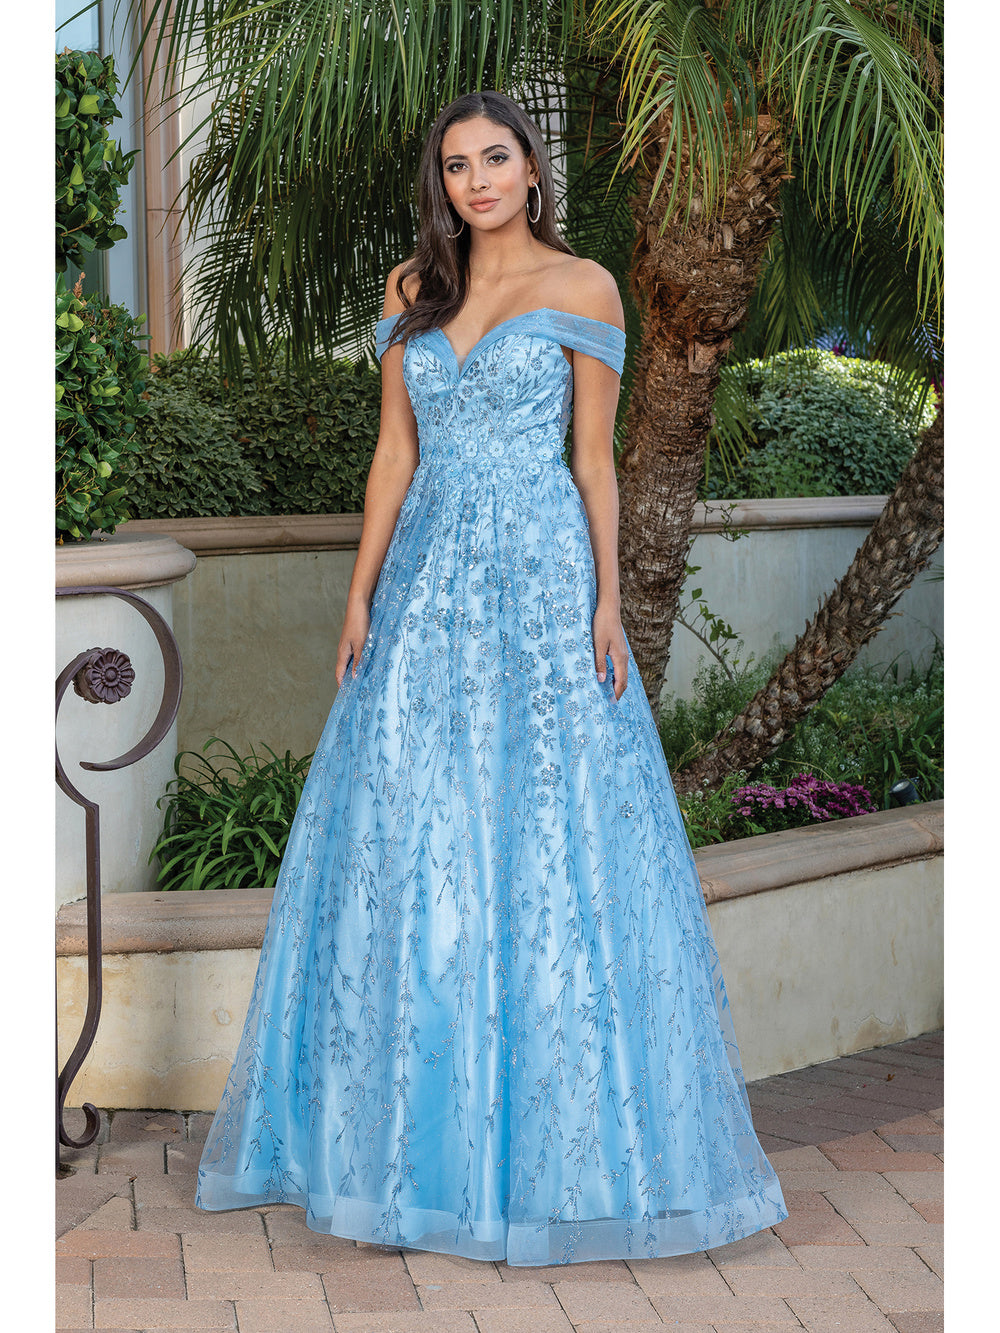 DQ 4273 - Glitter Print Off The Shoulders A-Line Prom Gown with 3D floral V-Neck Bodice & Open Lace Up Corset Back Prom Dress Dancing Queen XS BAHAMA BLUE 